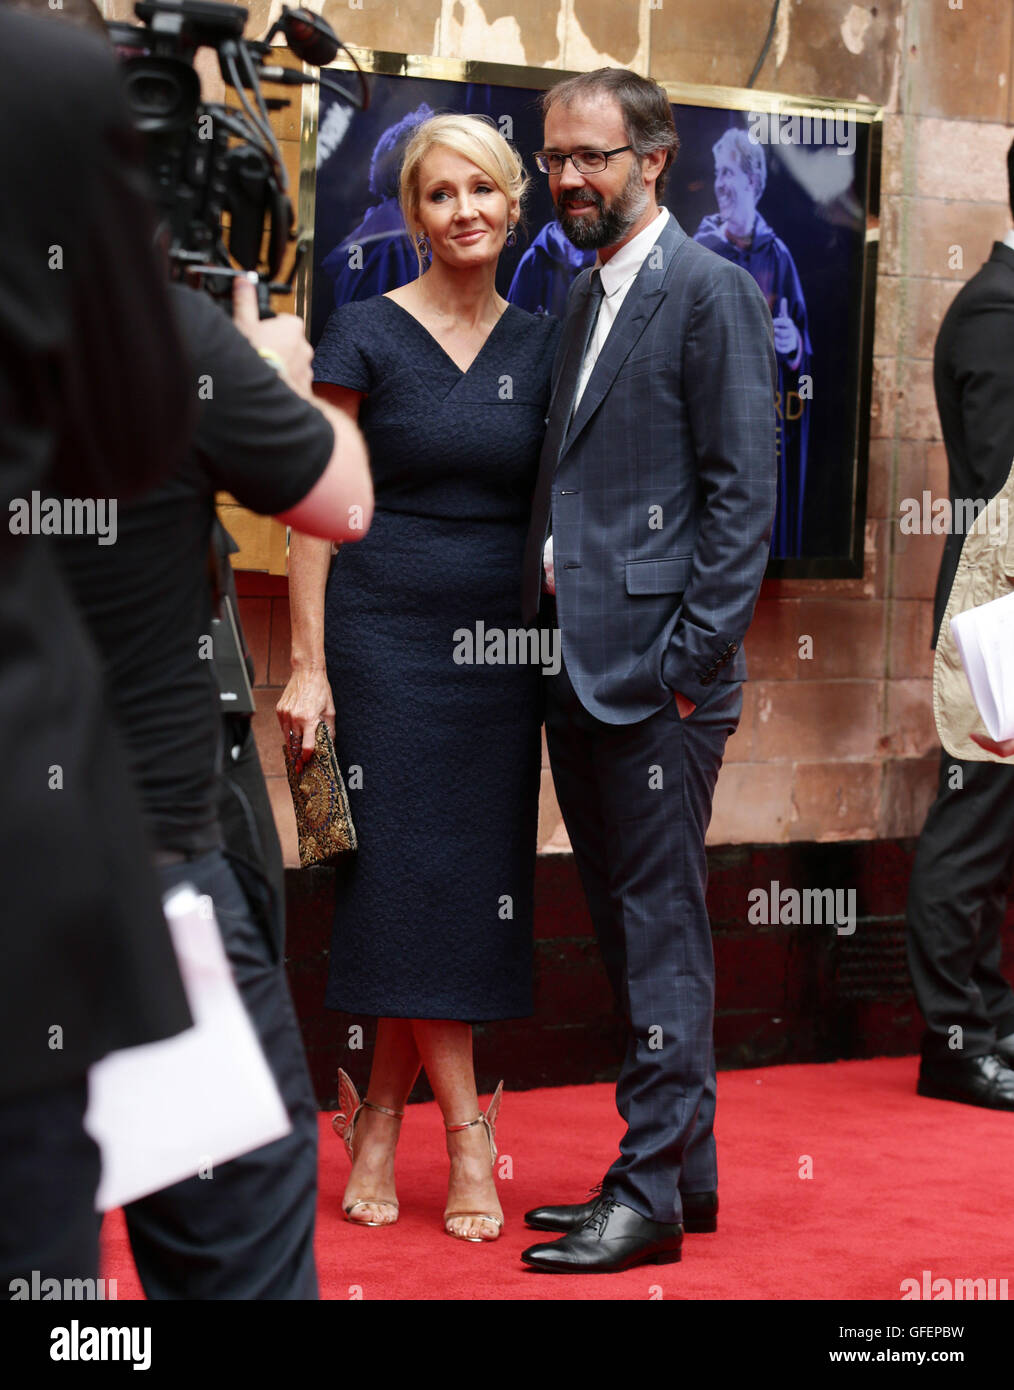 JK Rowling and her husband Neil Murray arrive for the opening gala performance of Harry Potter and The Cursed Child, at the Palace Theatre in London. Stock Photo